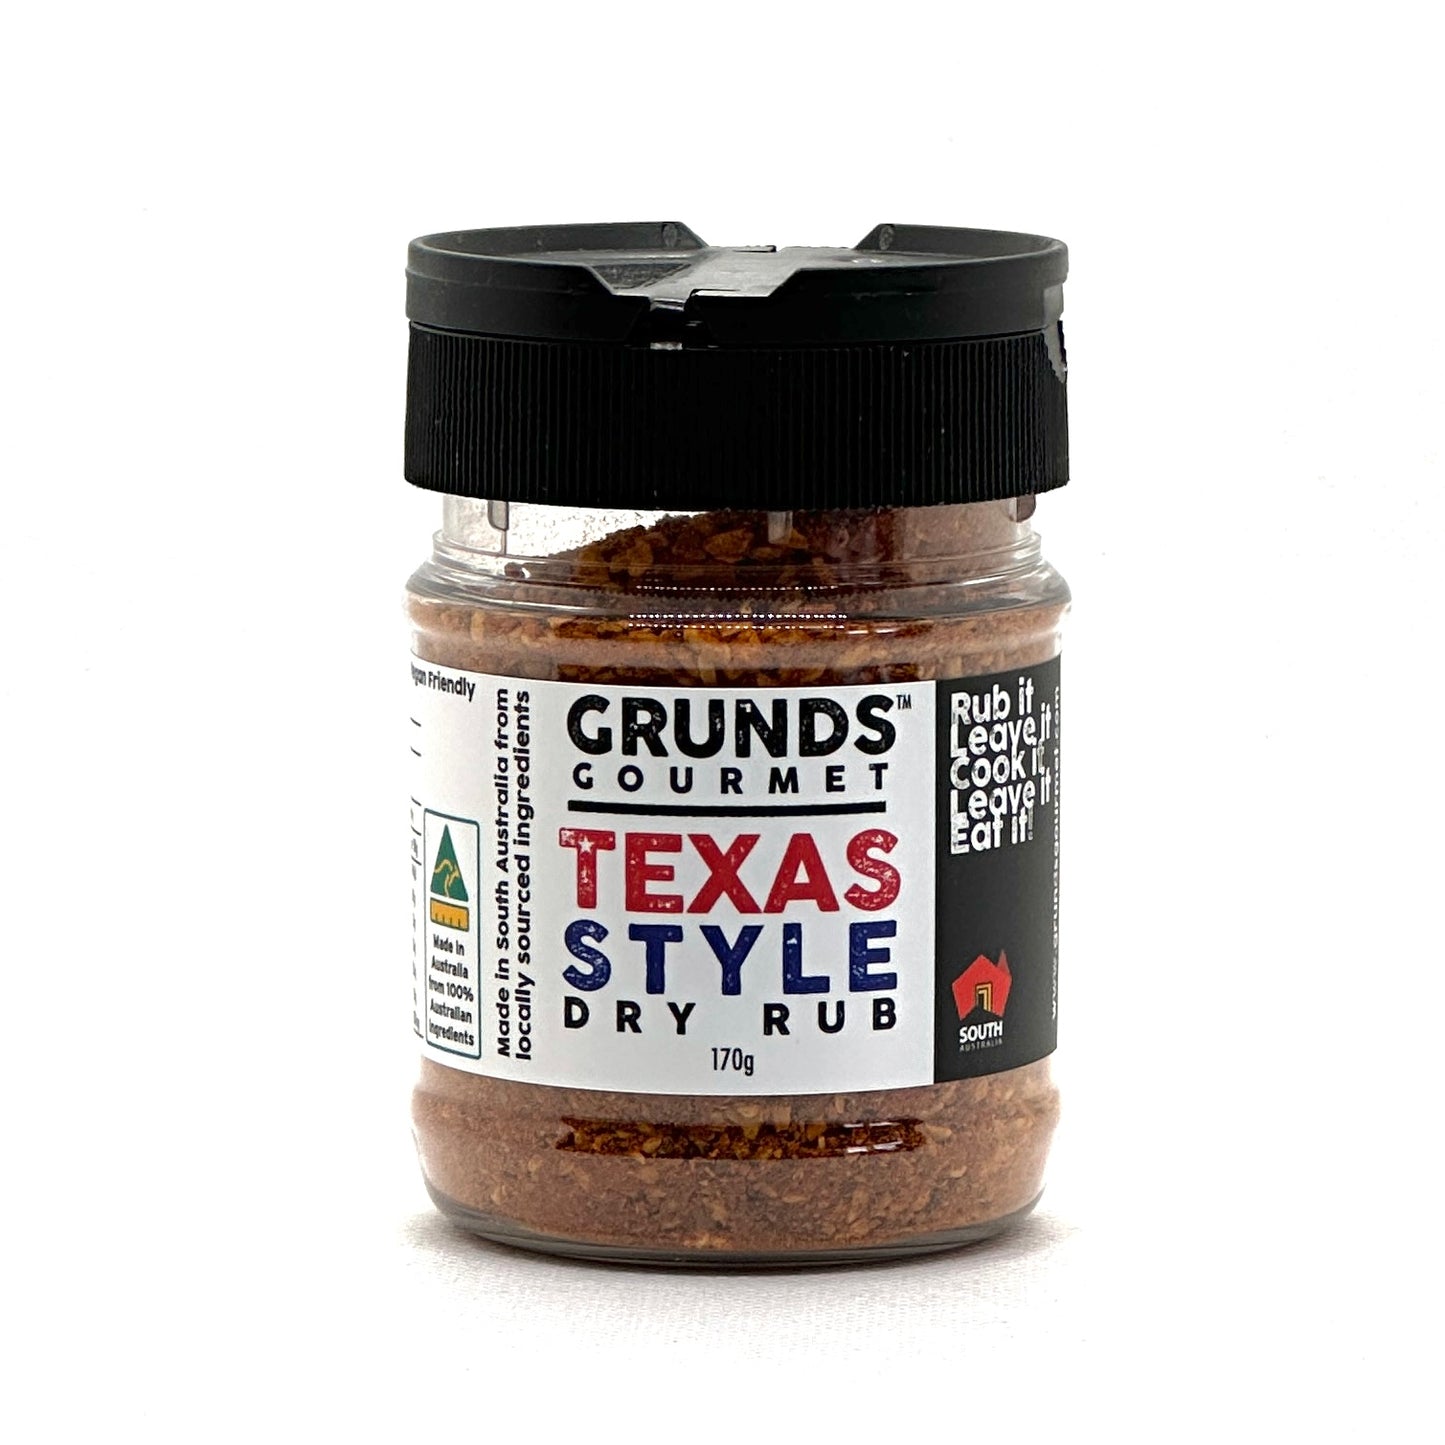 Close-up of Grund's Gourmet Texas Style Dry Rub, a blend of sea salt, smoked paprika, and cayenne powder, perfect for enhancing steak, chicken, and pork with authentic BBQ flavors.